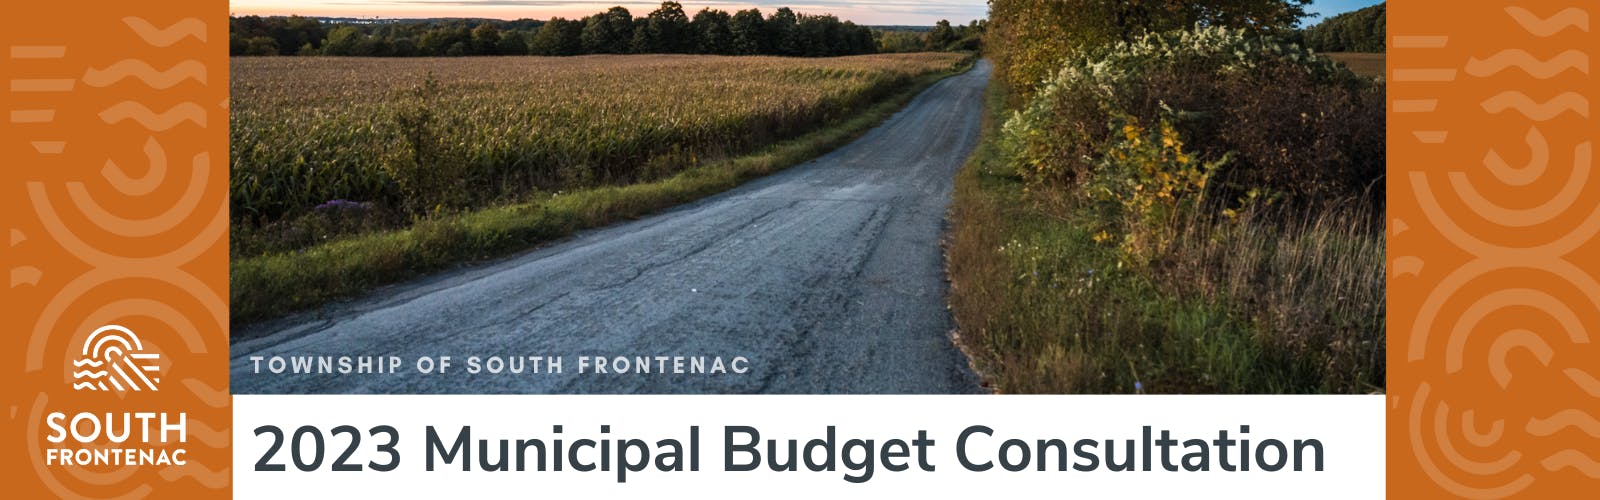 2023 budget consultation picture of road in township